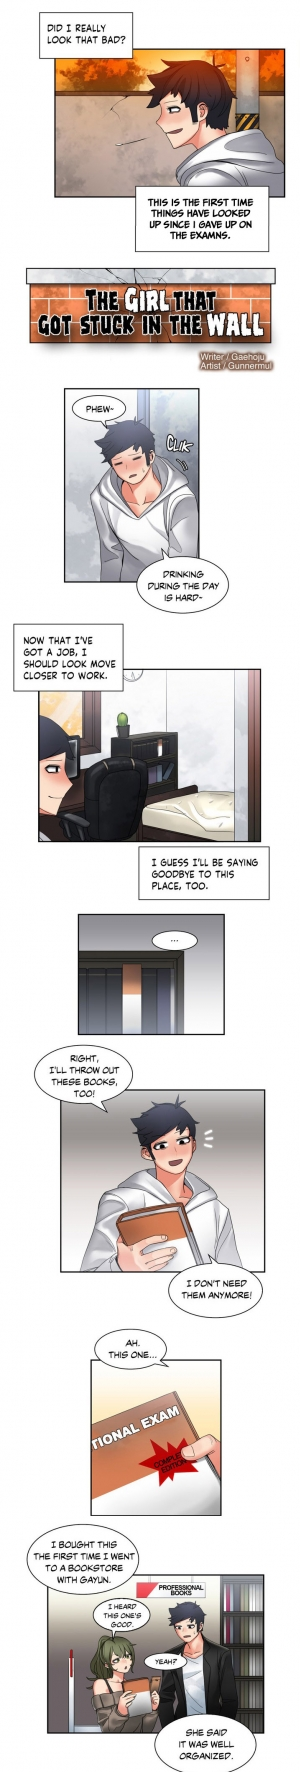 [Gaehoju, Gunnermul] The Girl That Got Stuck in the Wall Ch.11/11 [COMPLETED] [English] [Hentai Universe] - Page 97